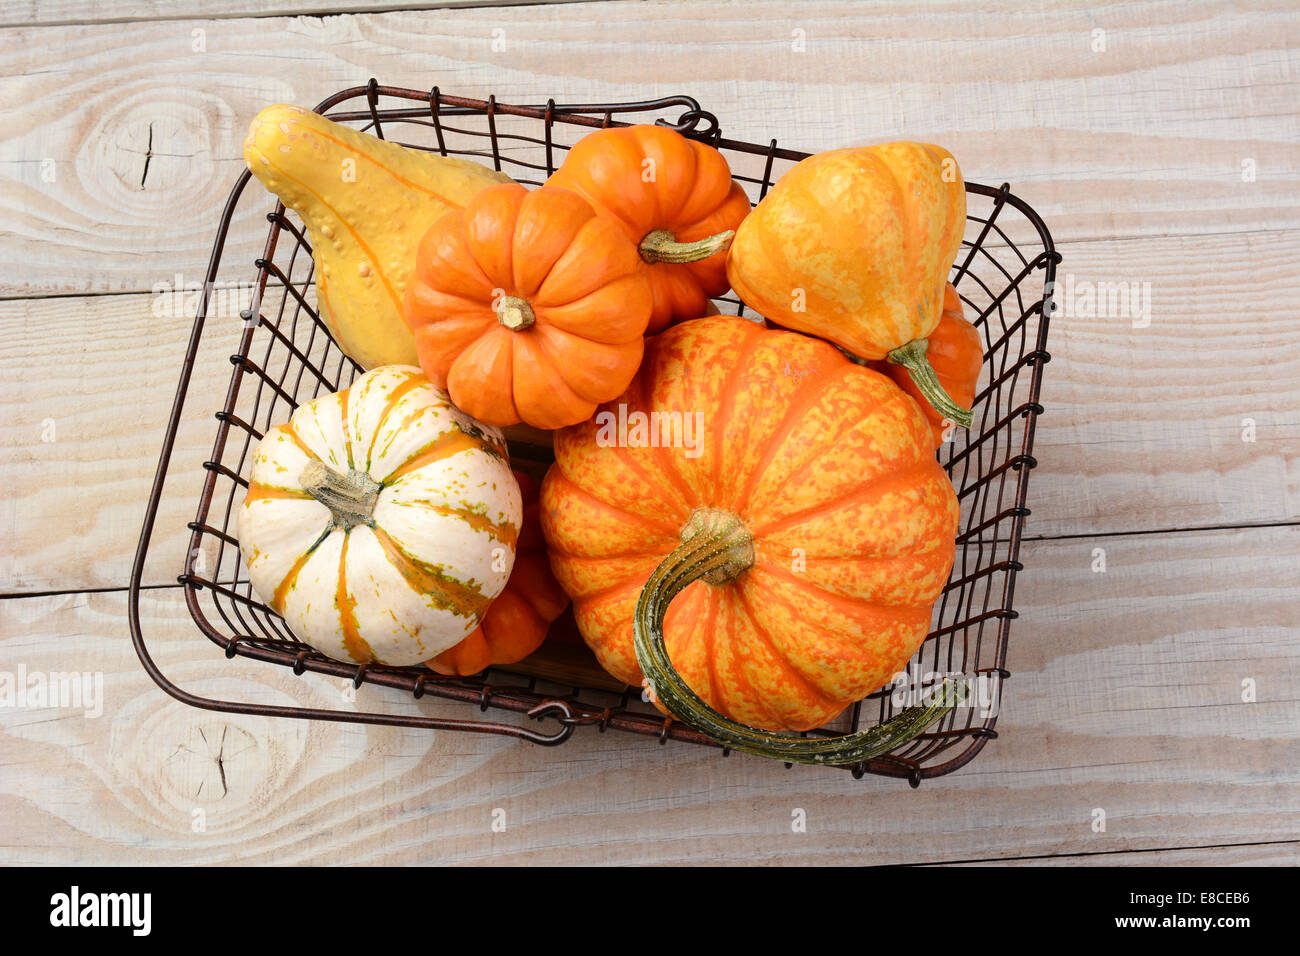 High angle shot of a variety of decorative pumpkins and gourds in an old wire shopping basket. Horizontal format on a rustic whi Stock Photo